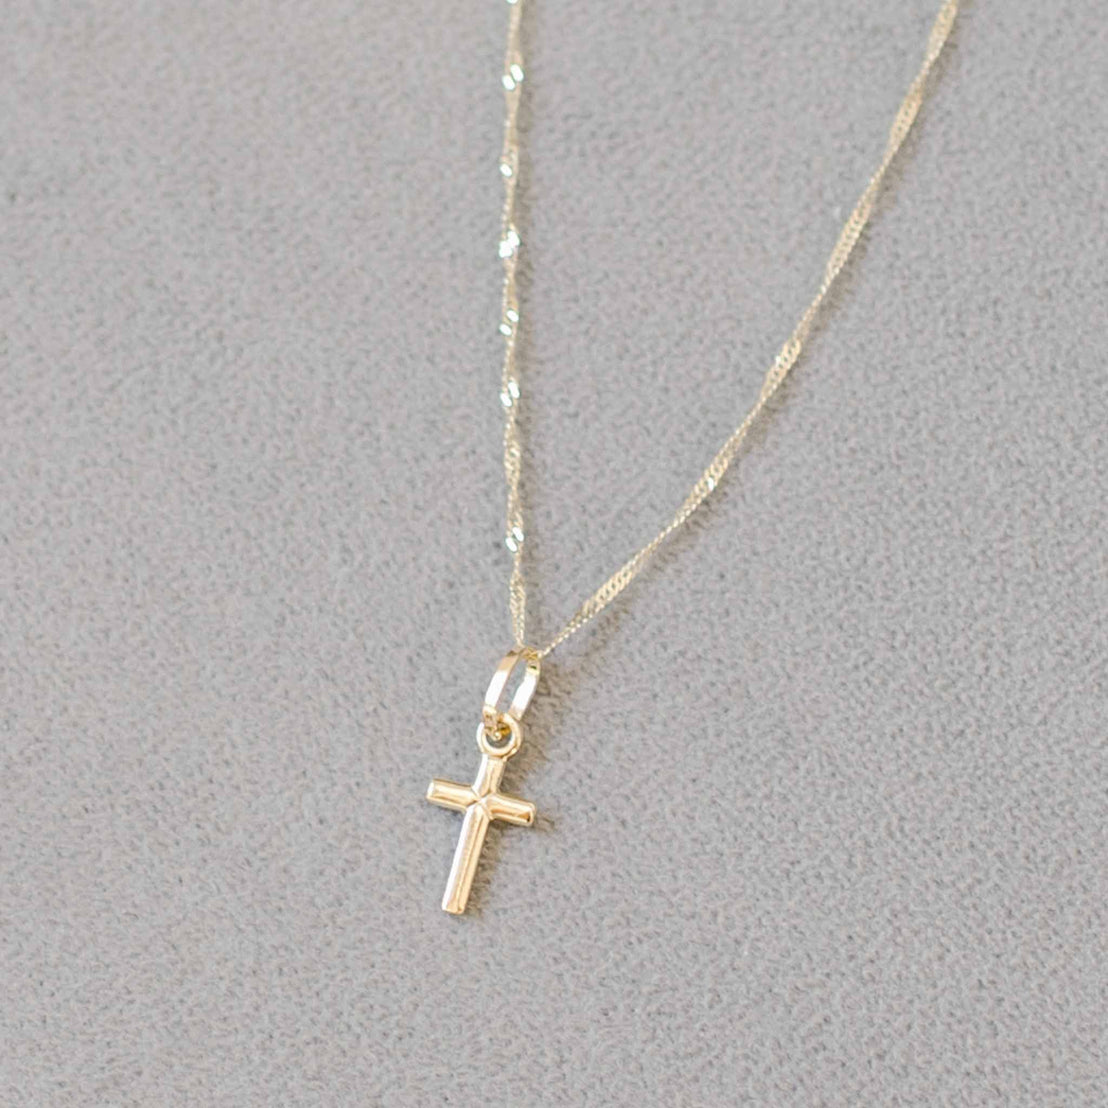 Small solid gold cross on chain